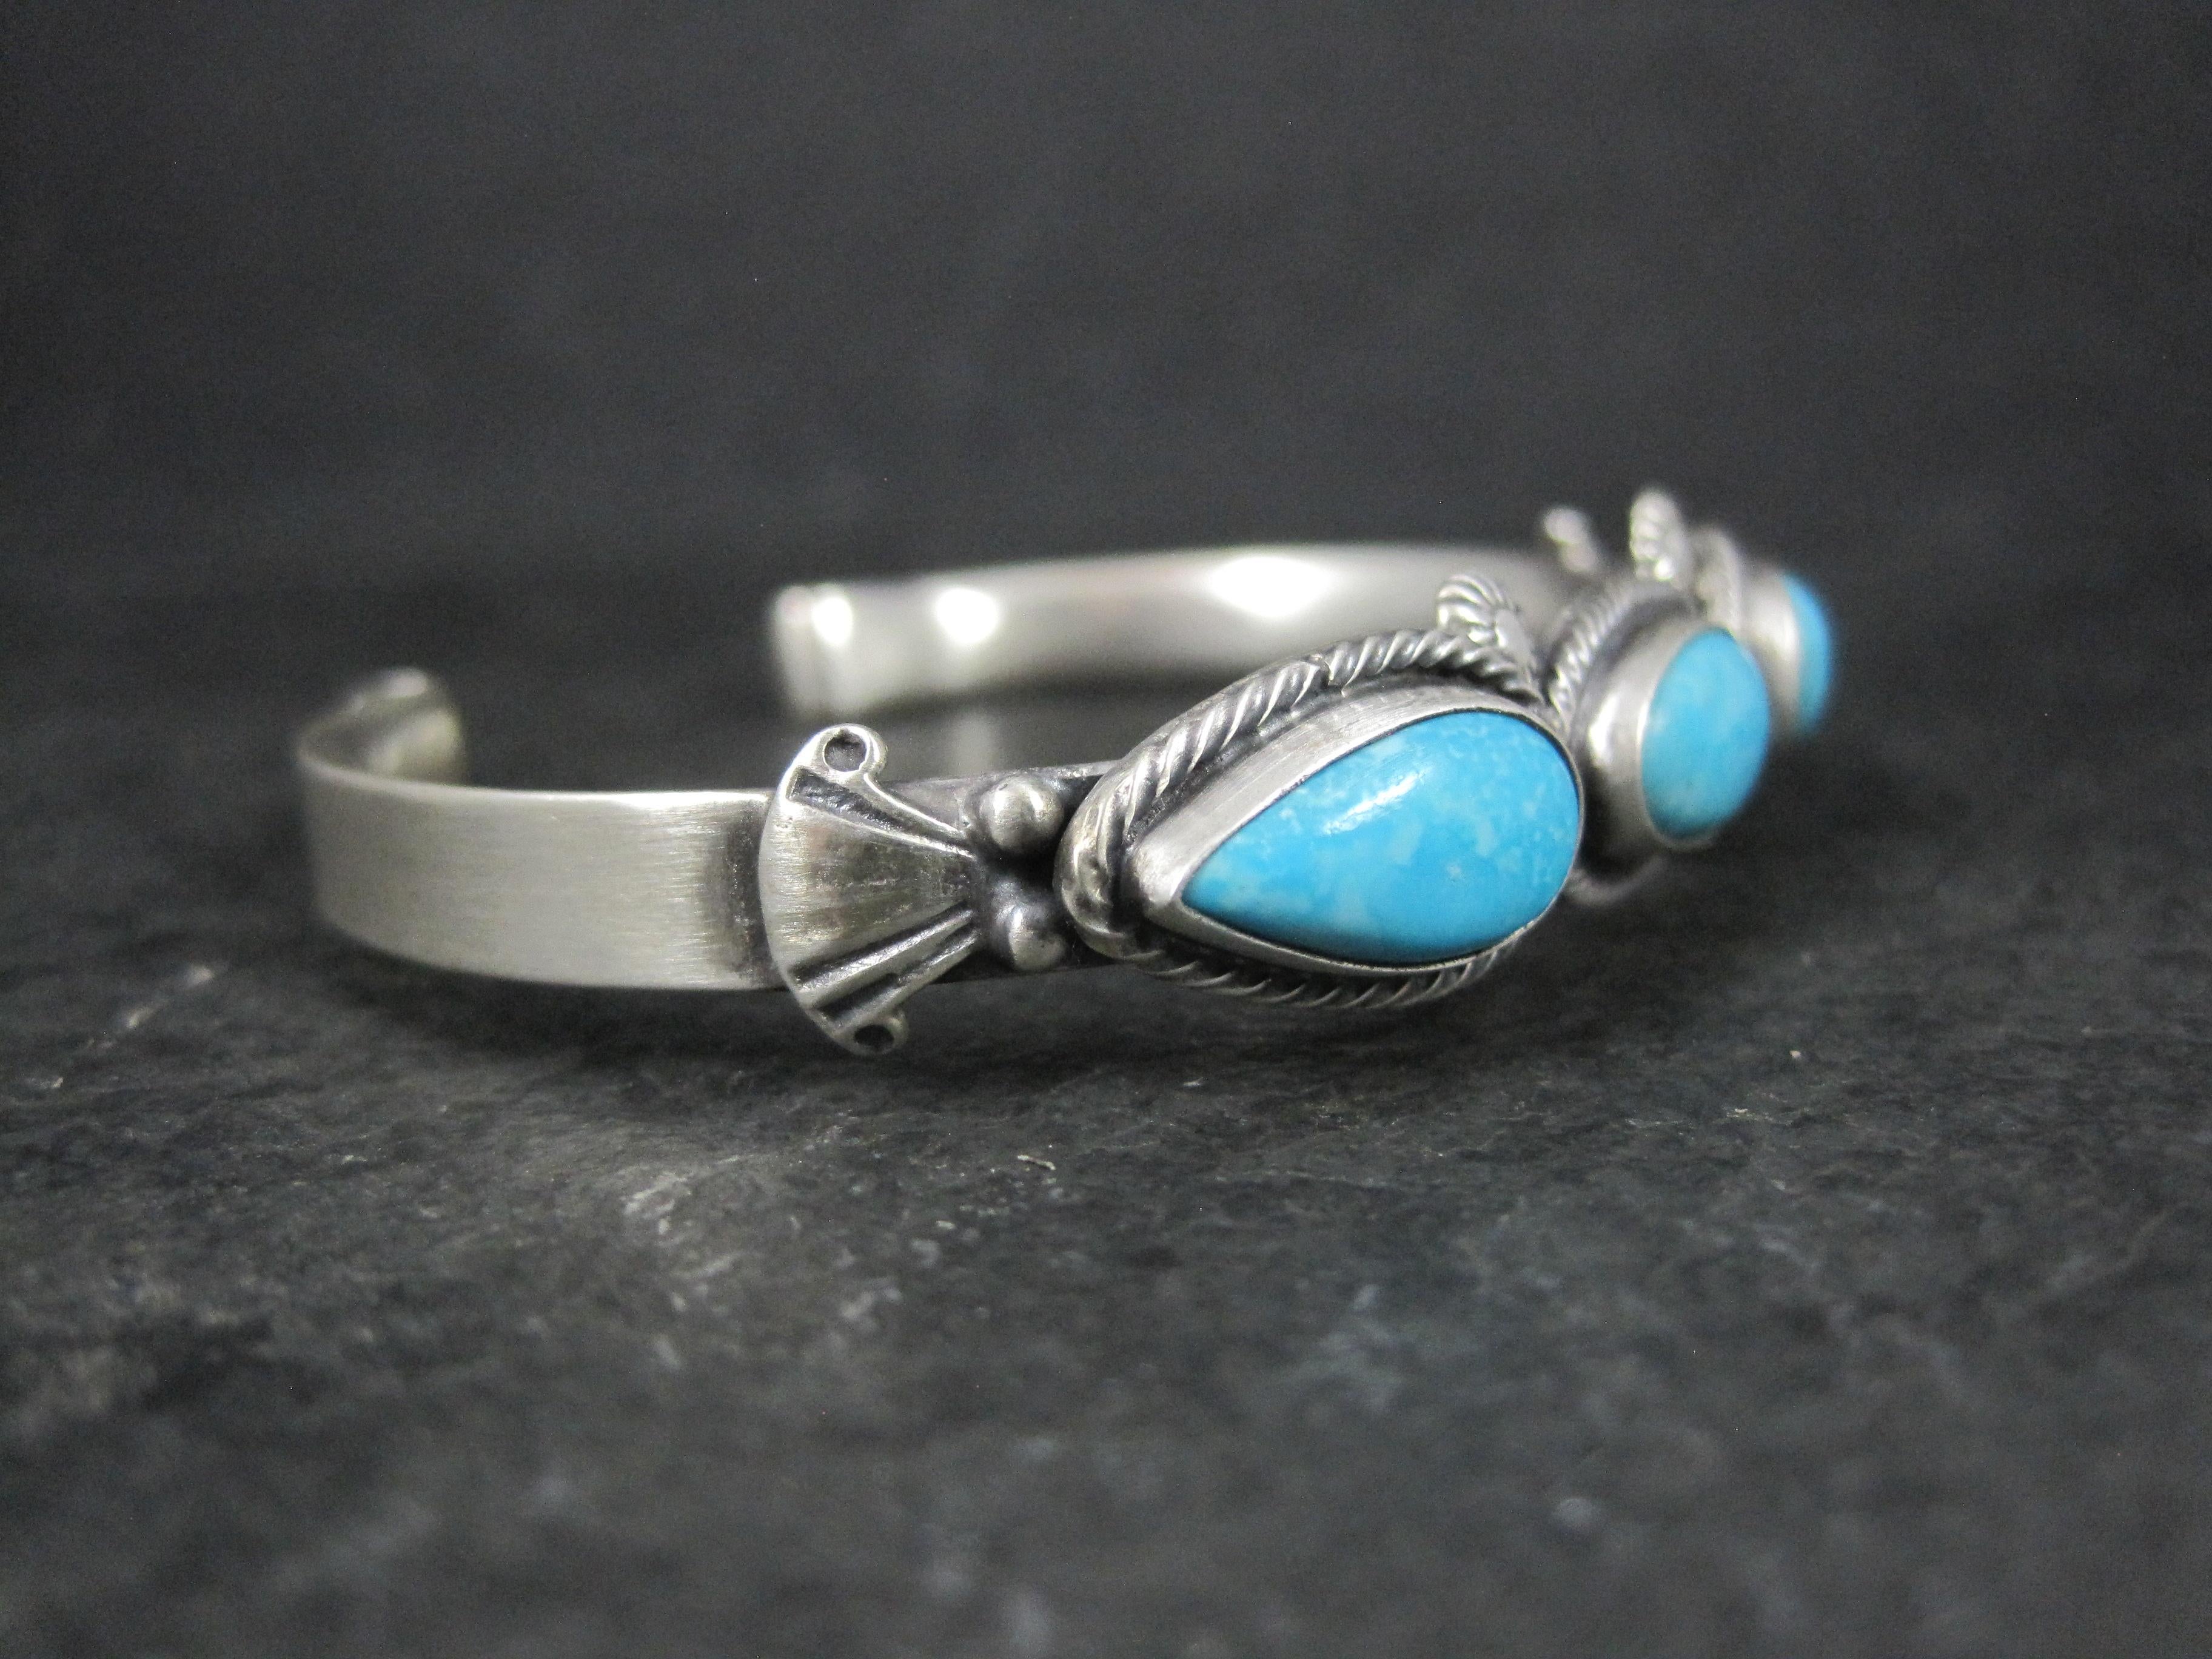 Cabochon Southwestern Turquoise Cuff Bracelet Sterling Silver 6 Inches For Sale